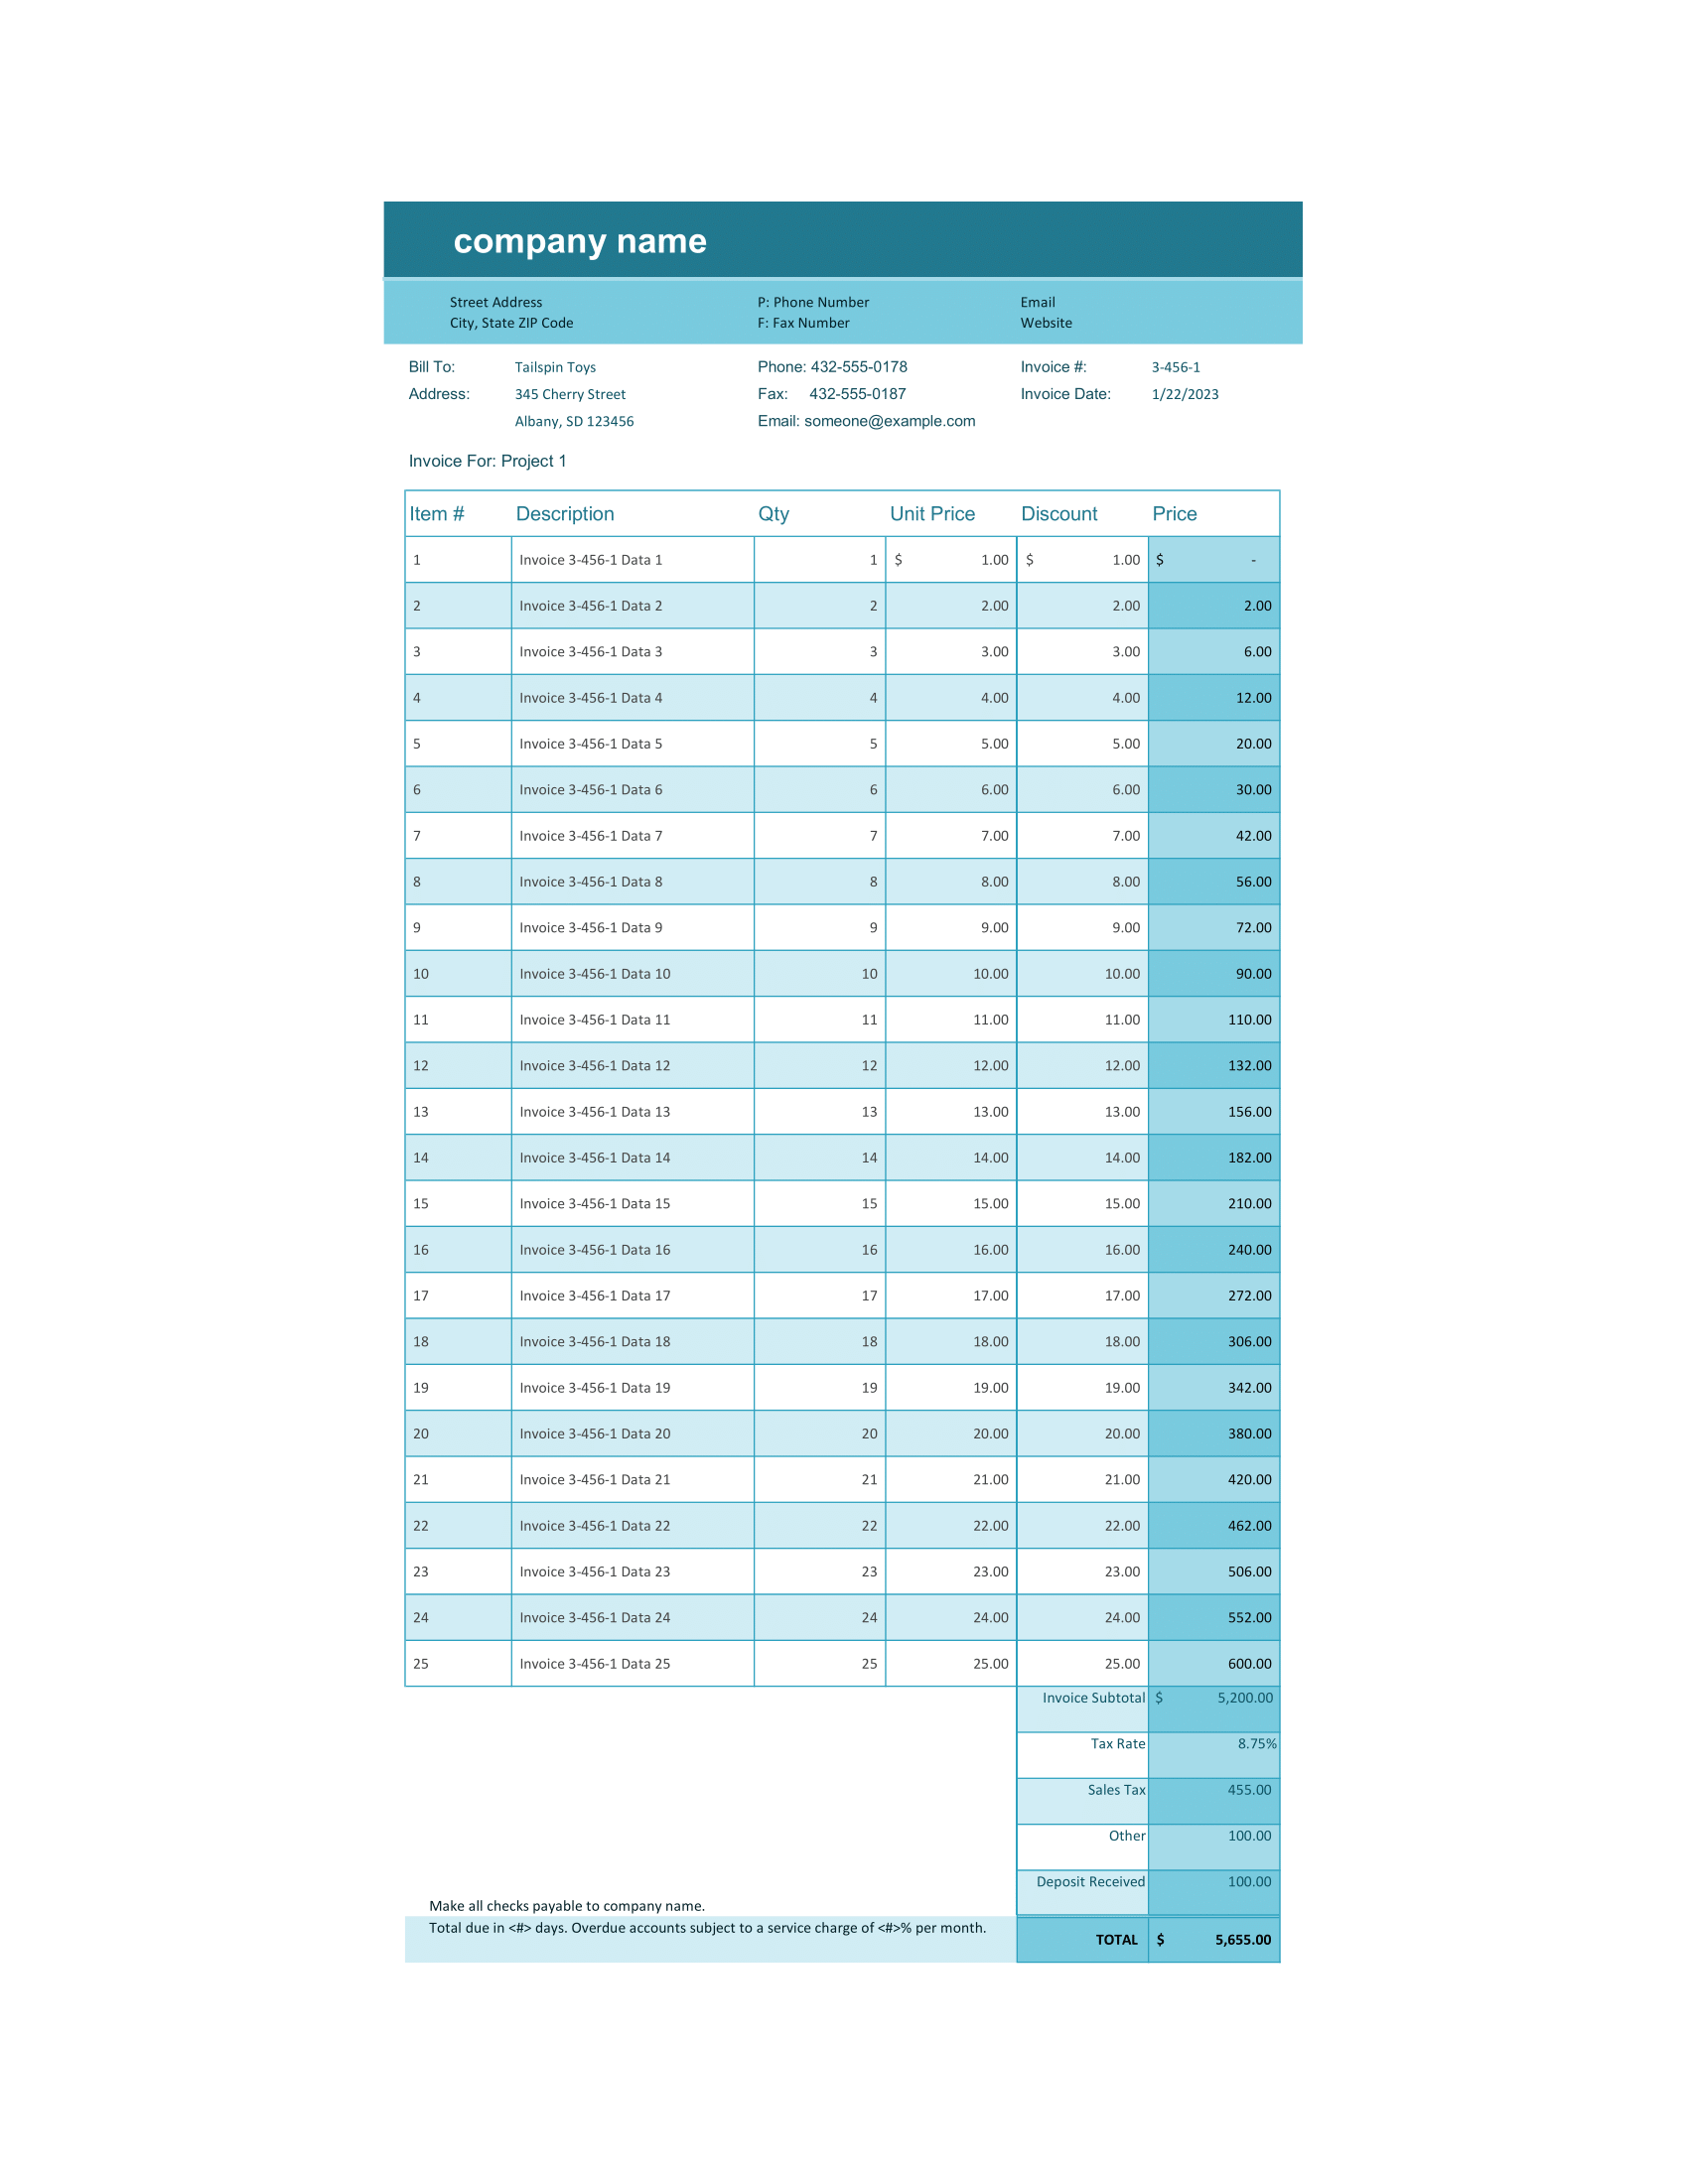 Sales Invoice With Tracker